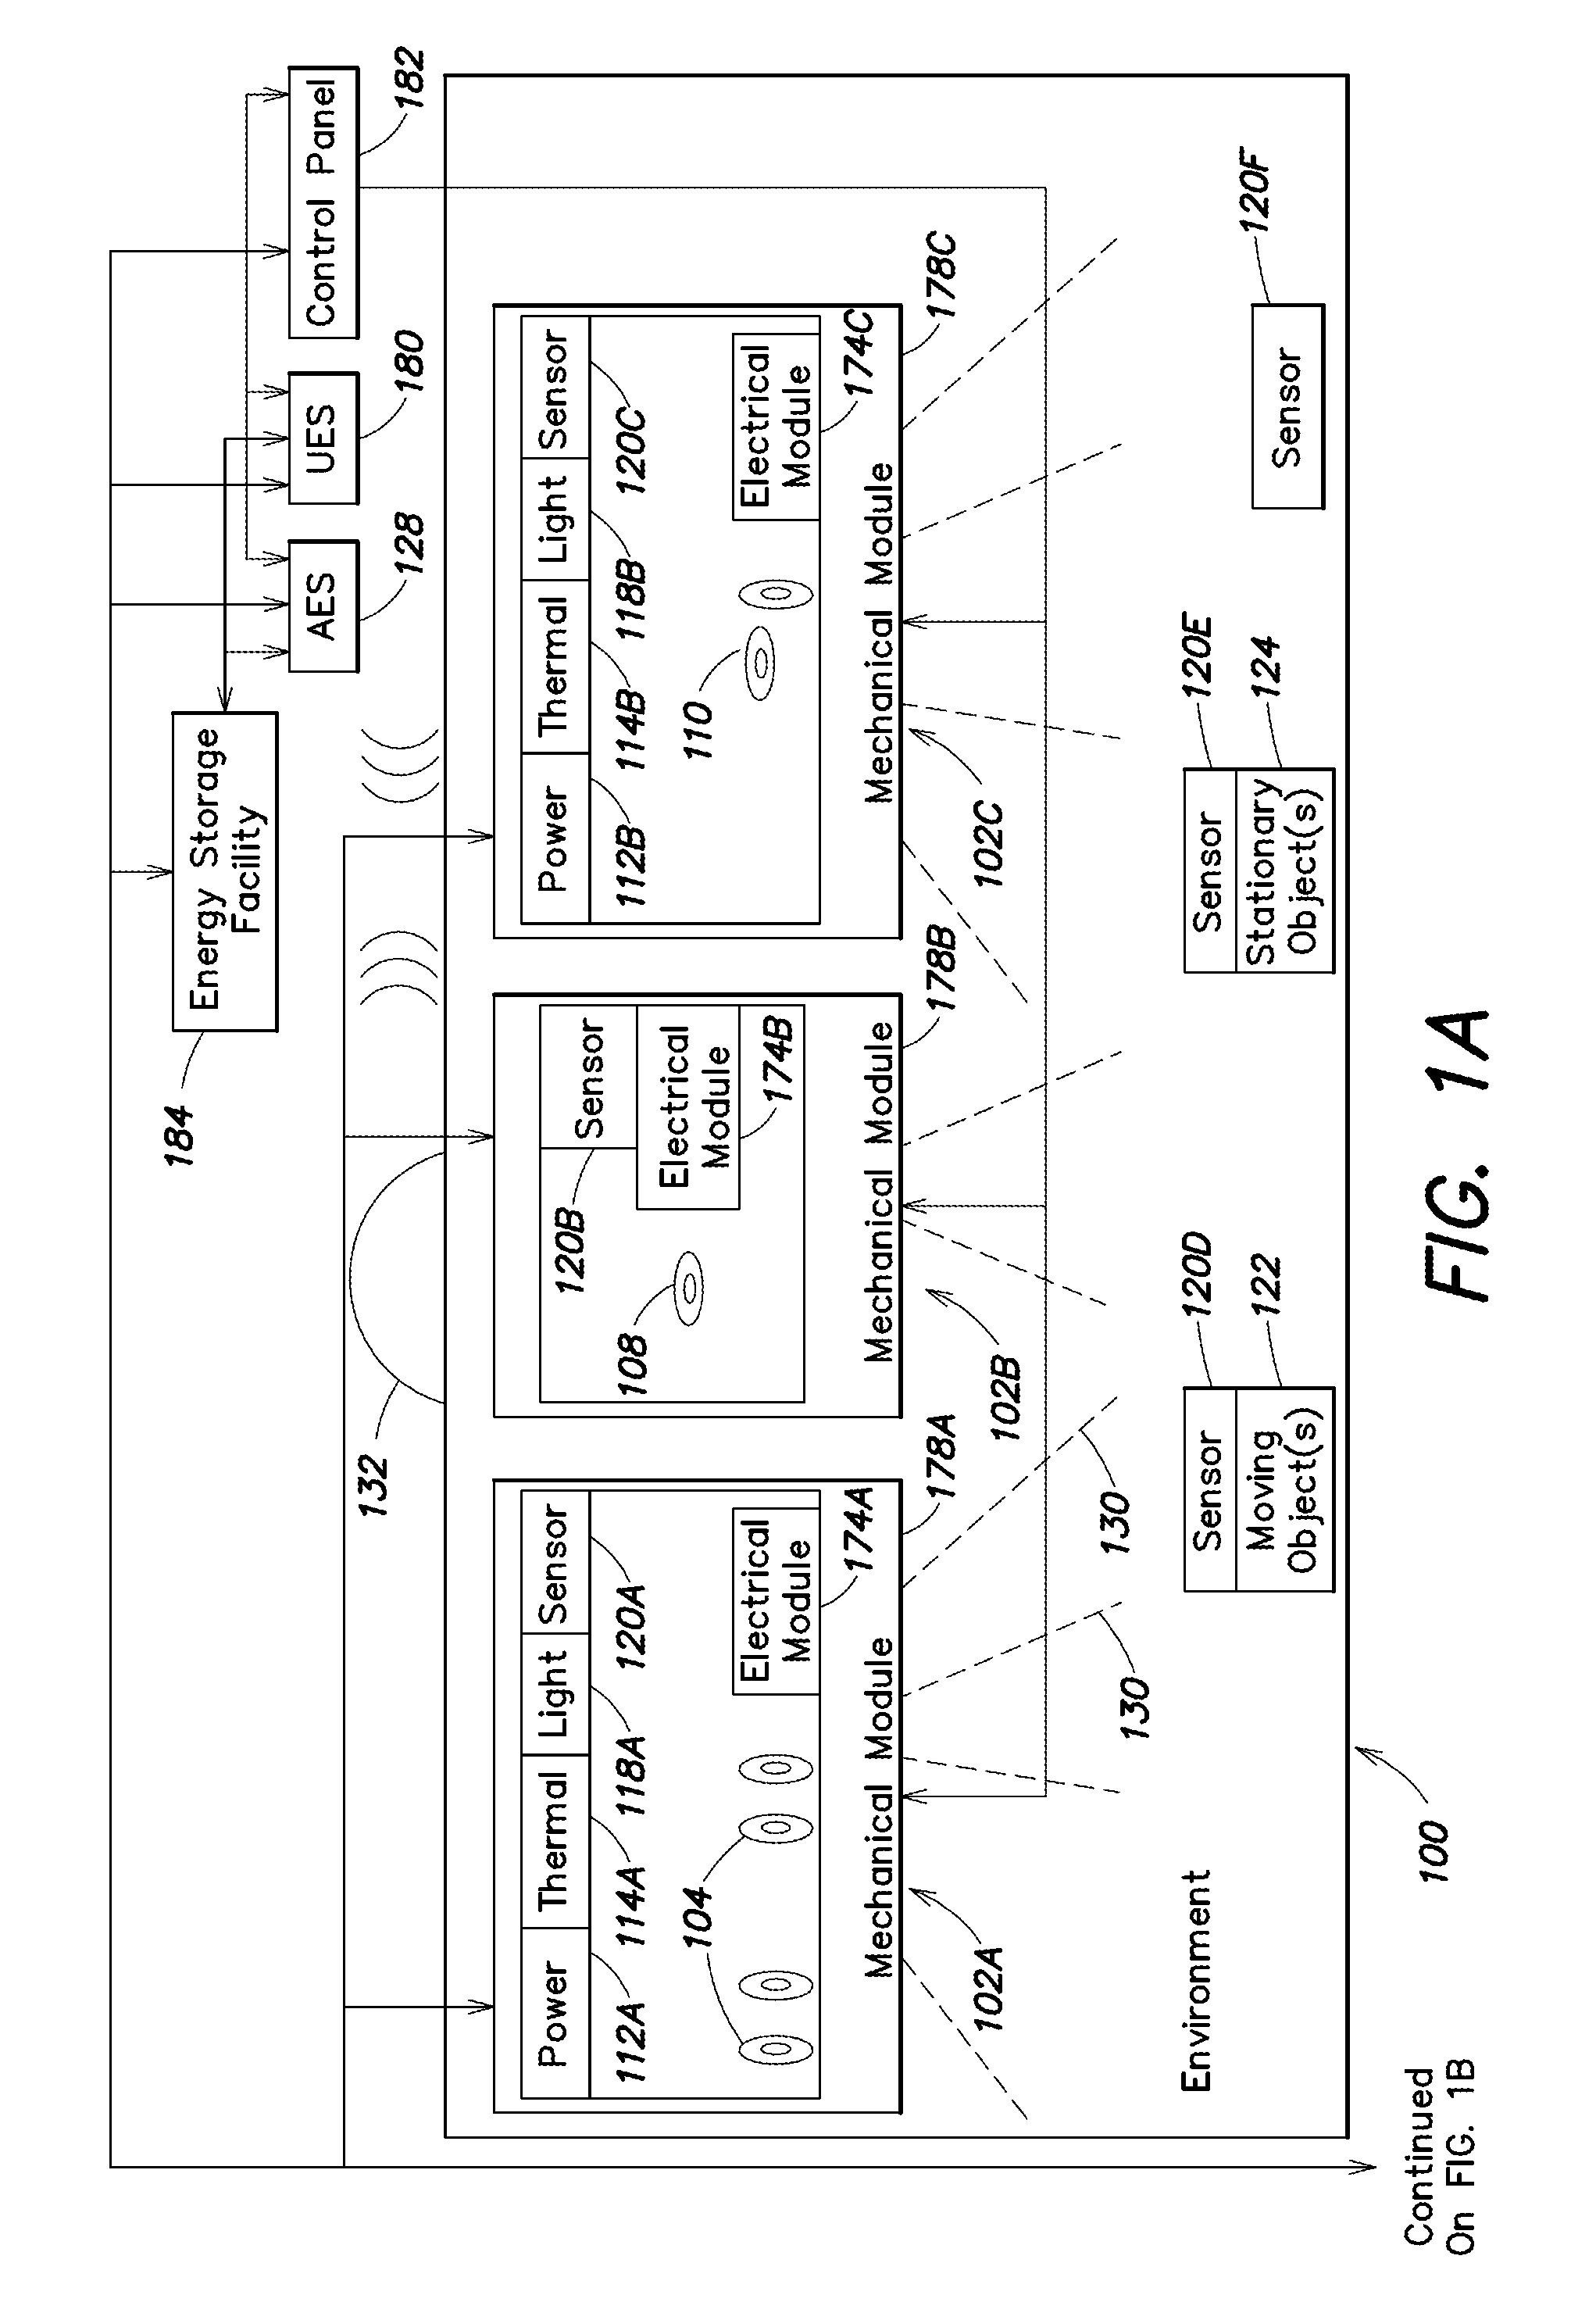 Methods, systems, and apparatus for mapping a network of lighting fixtures with light module identification